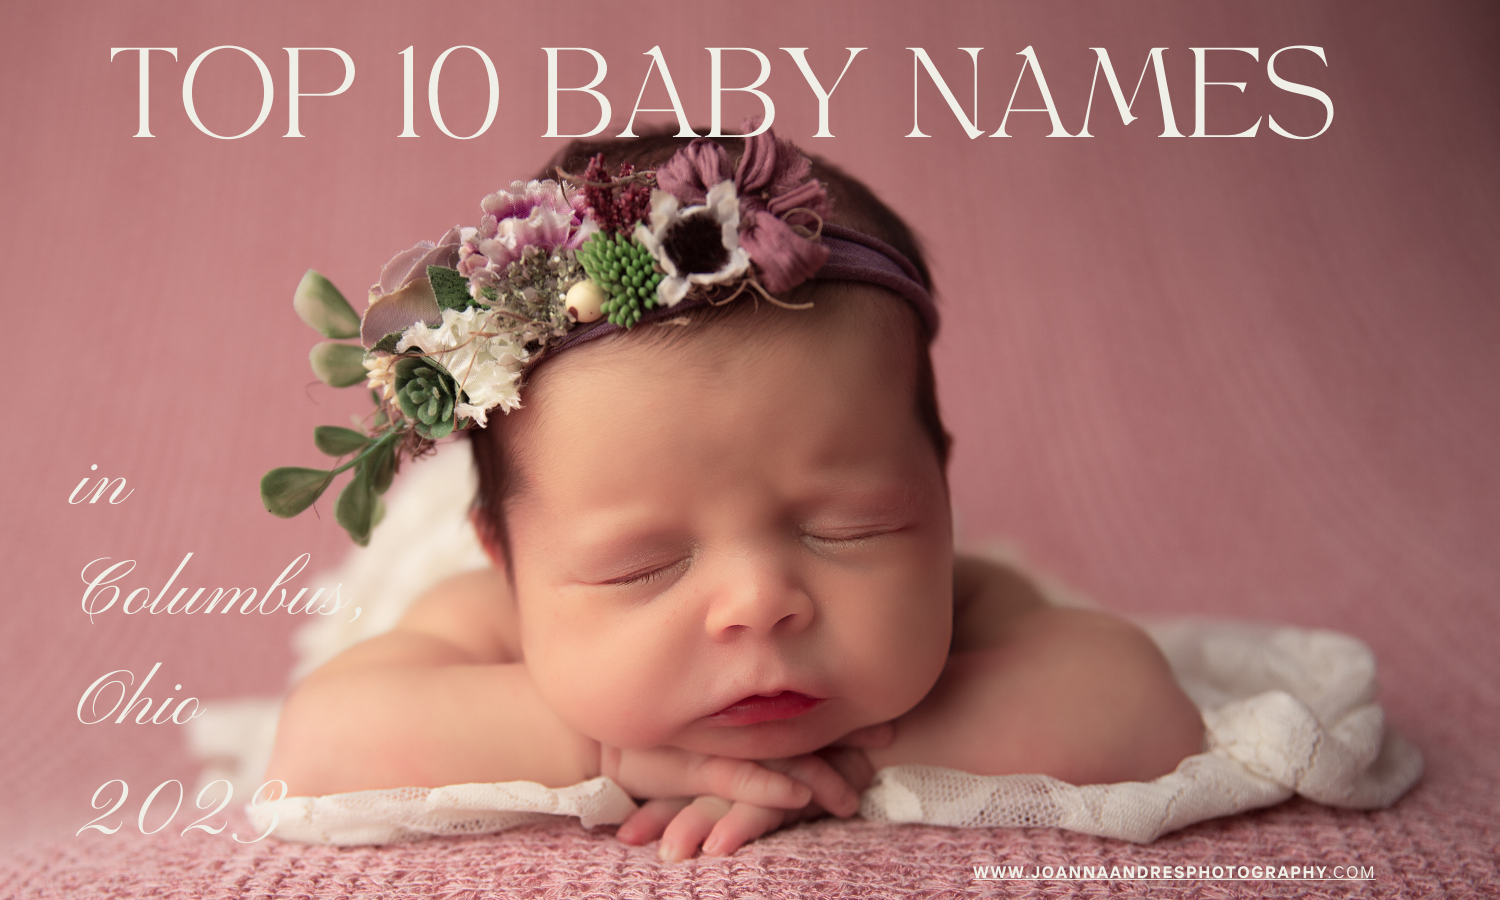 Baby Girl with a mauve floral headband posed with her hands folded under her chin